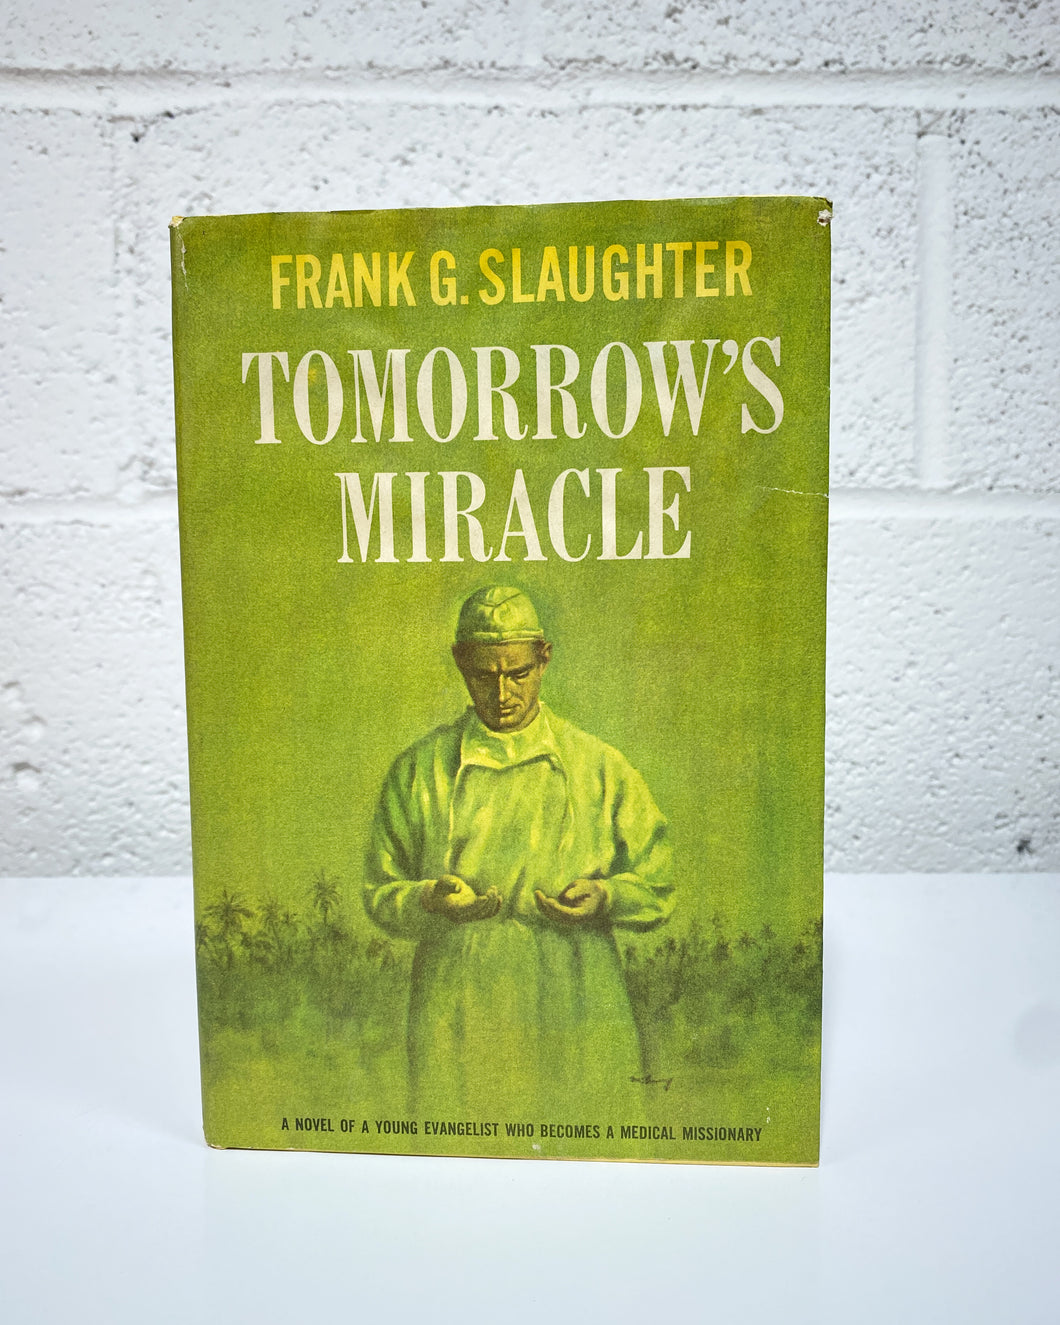 Tomorrow’s Miracle by Frank G. Slaughter